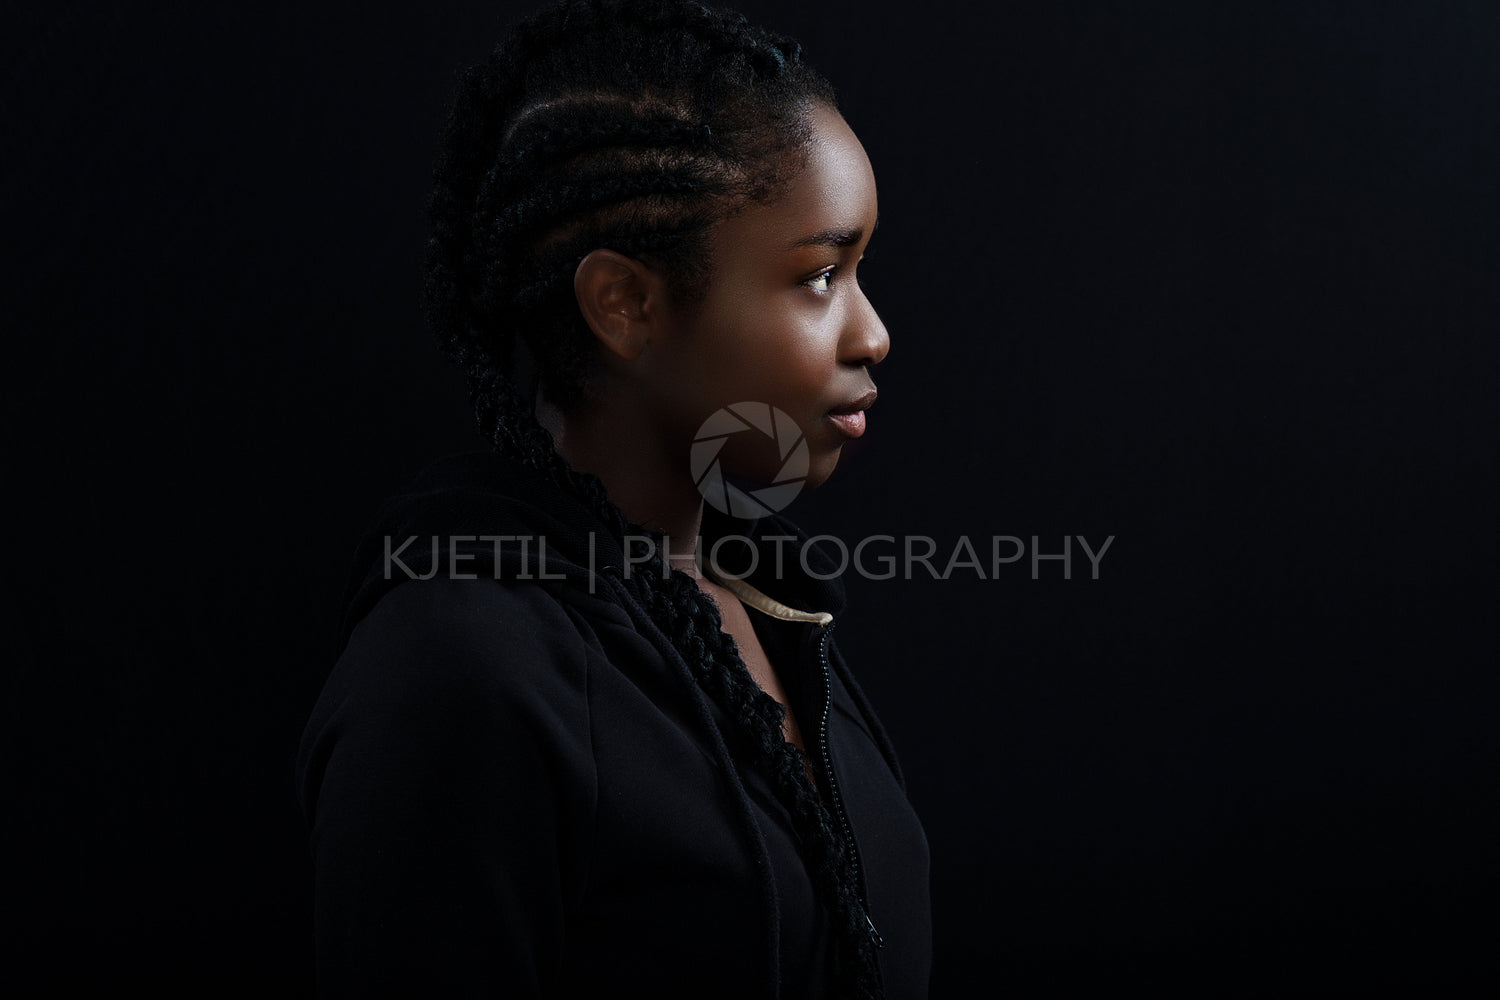 Cool and Beautiful Black Female Model Looking Away Against Black Background